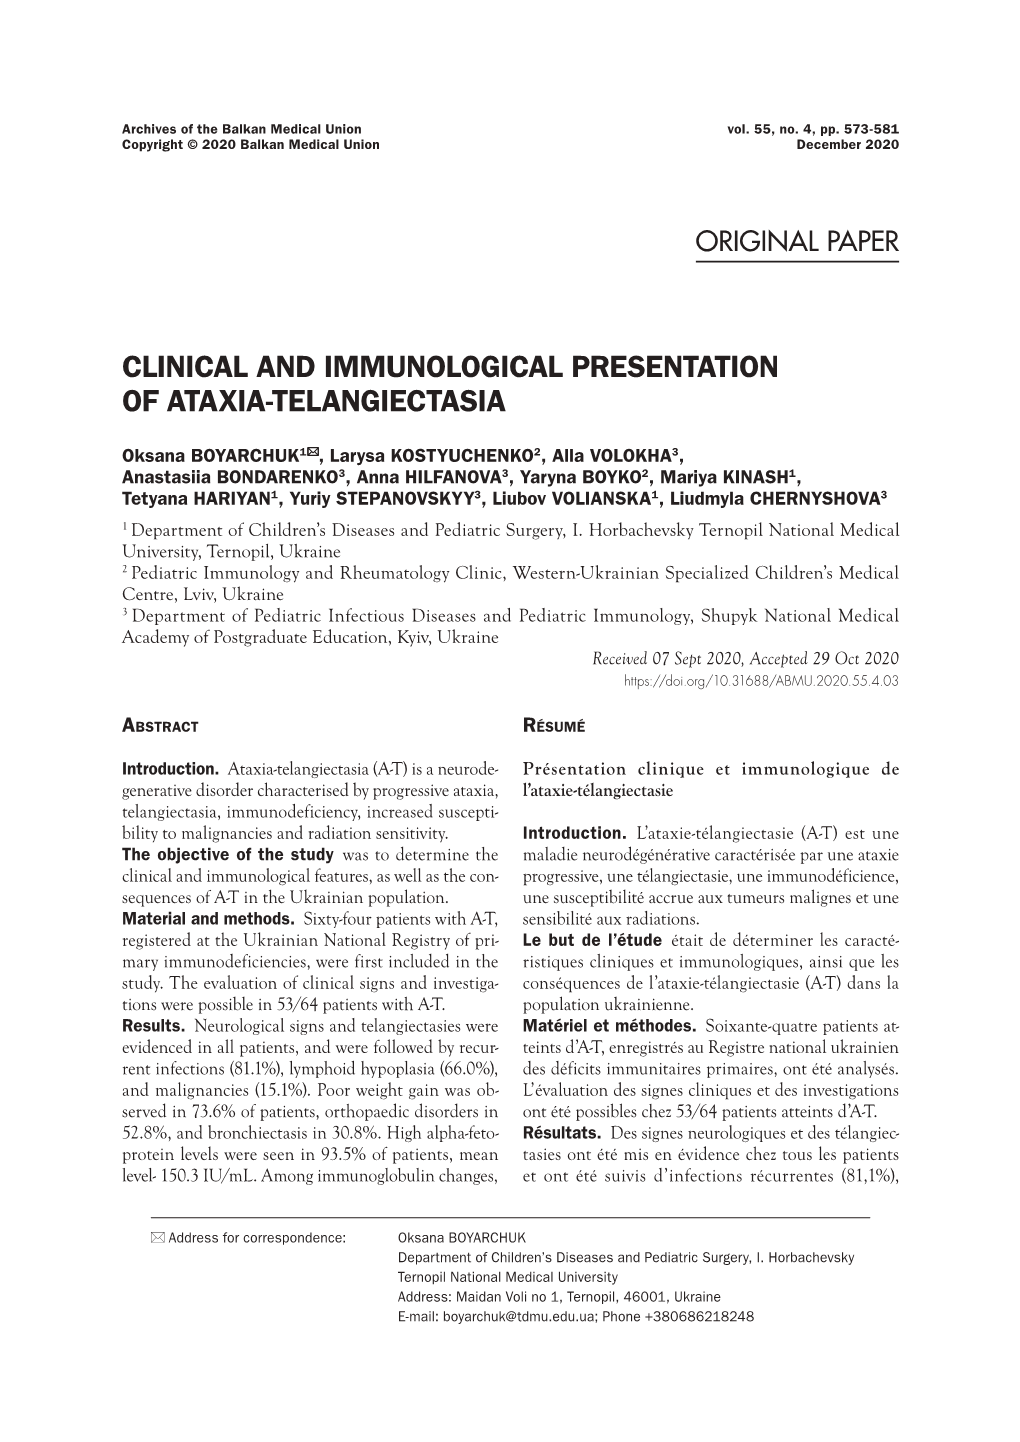 Clinical and Immunological Presentation of Ataxia-Telangiectasia